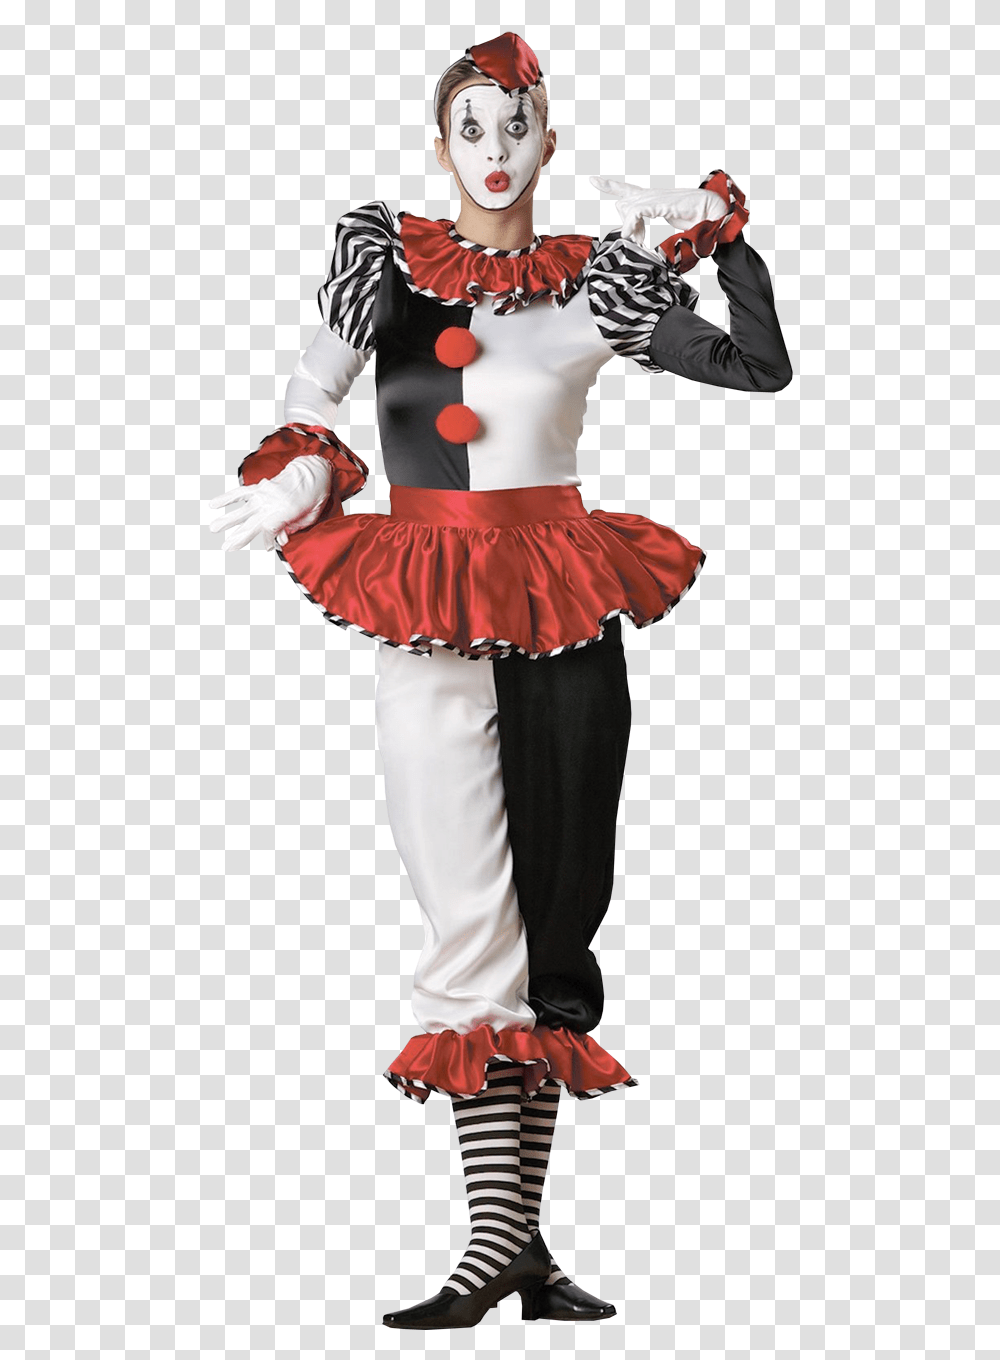 Download Clown Image For Free Harlequin Clown, Performer, Person, Human, Dance Pose Transparent Png